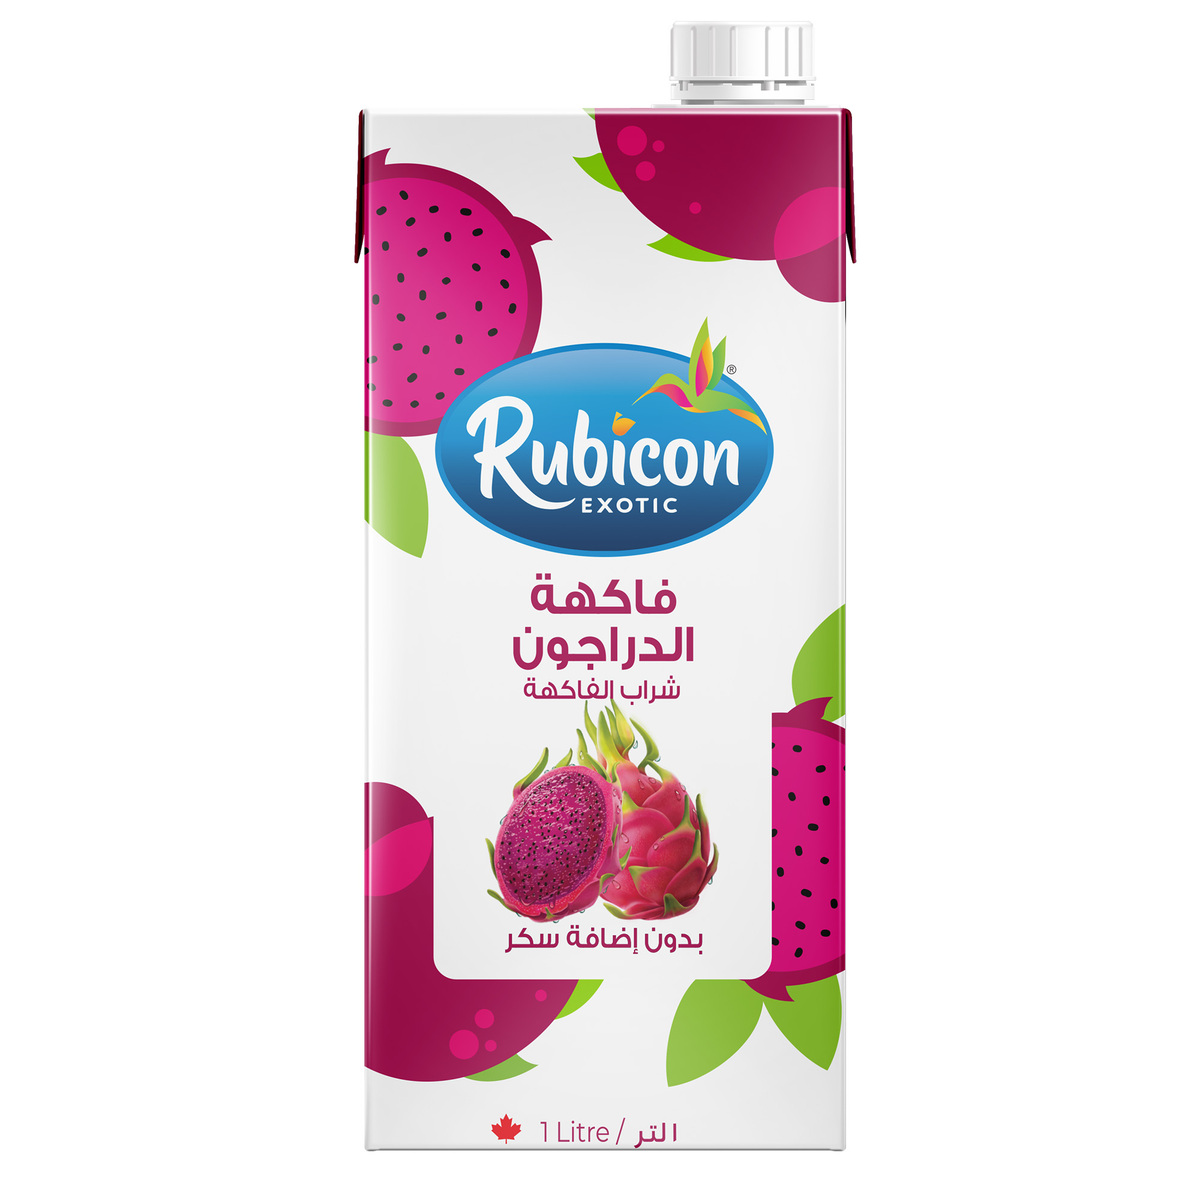 Rubicon Exotic No Added Sugar Dragon Fruit Drink 1 Litre